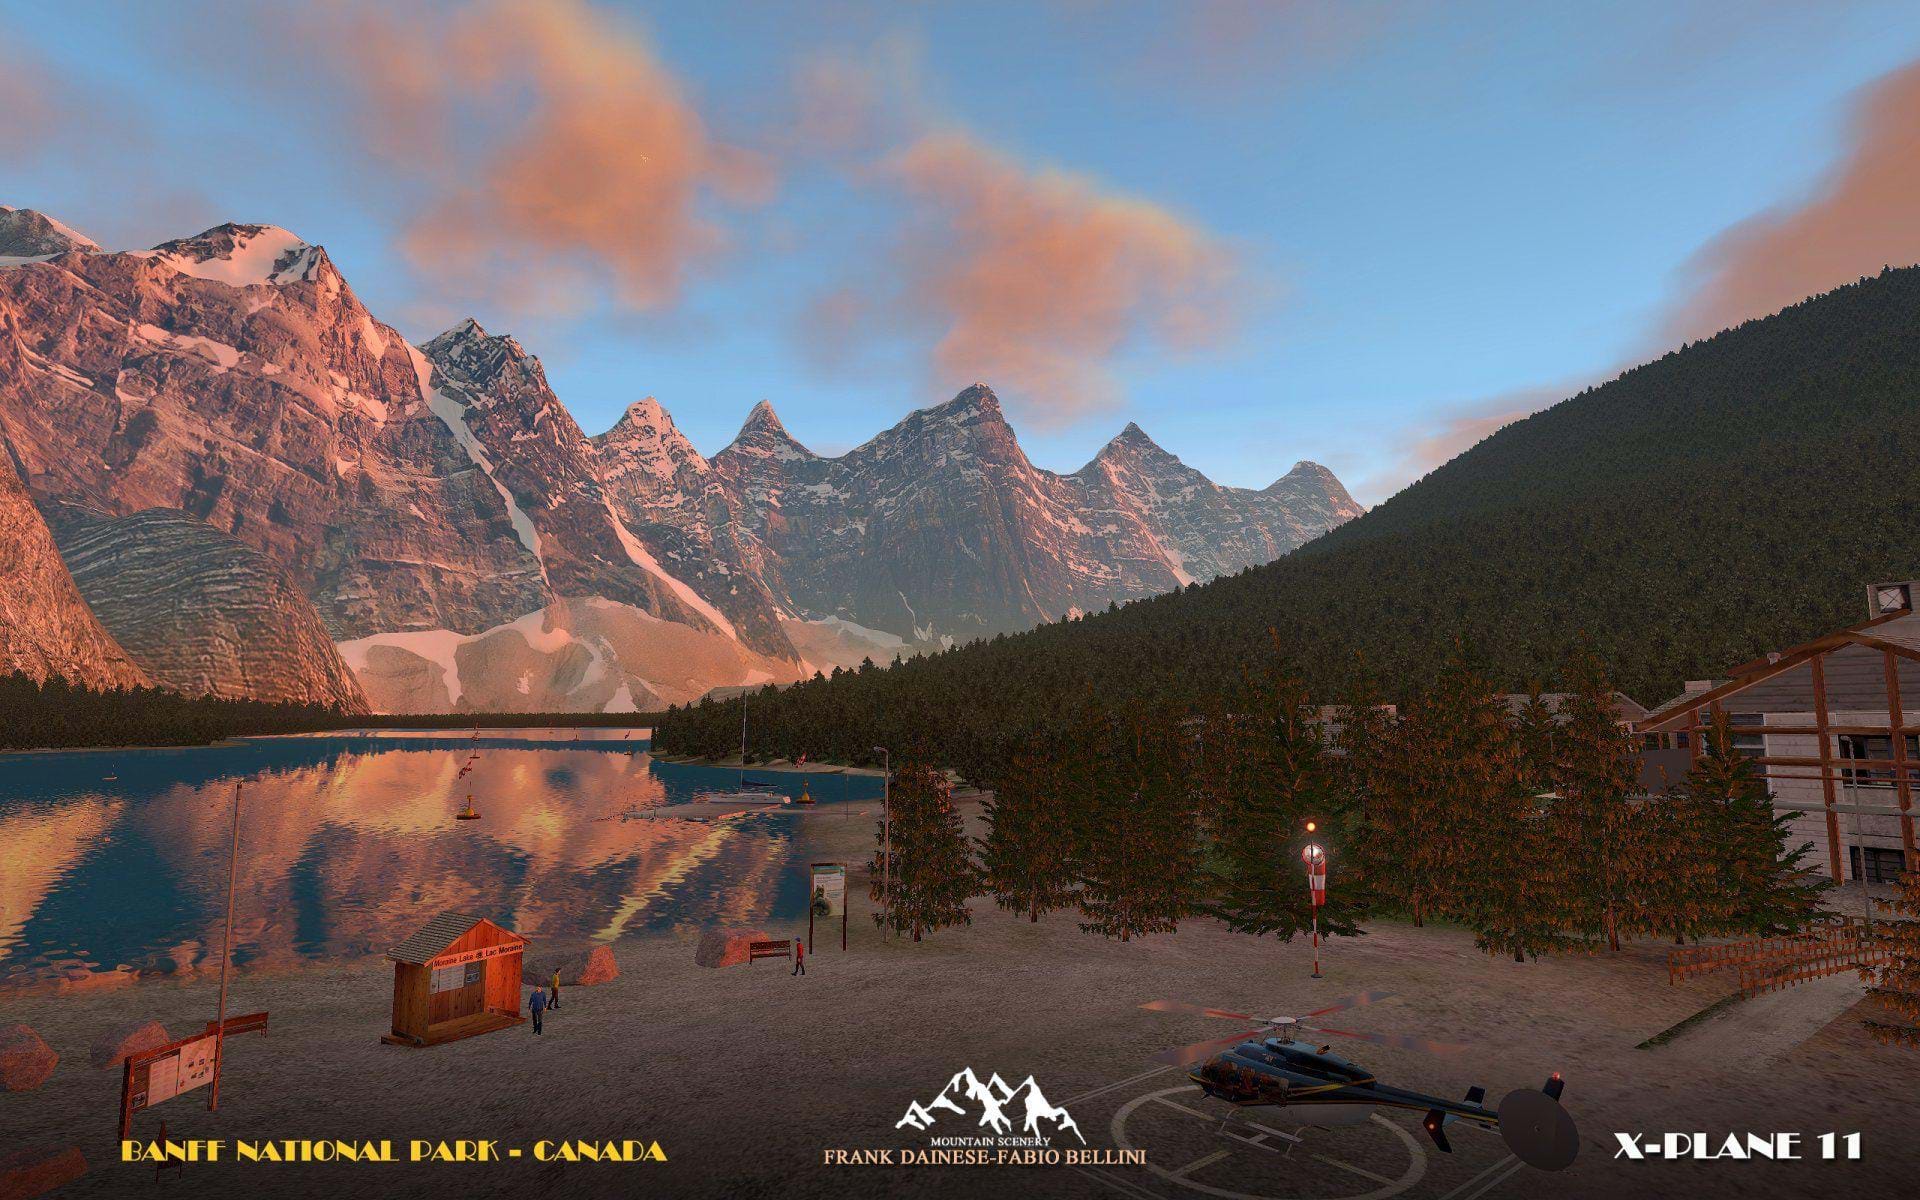 Frank Dainese and Fabio Bellini Banff National Park UHD for X-Plane